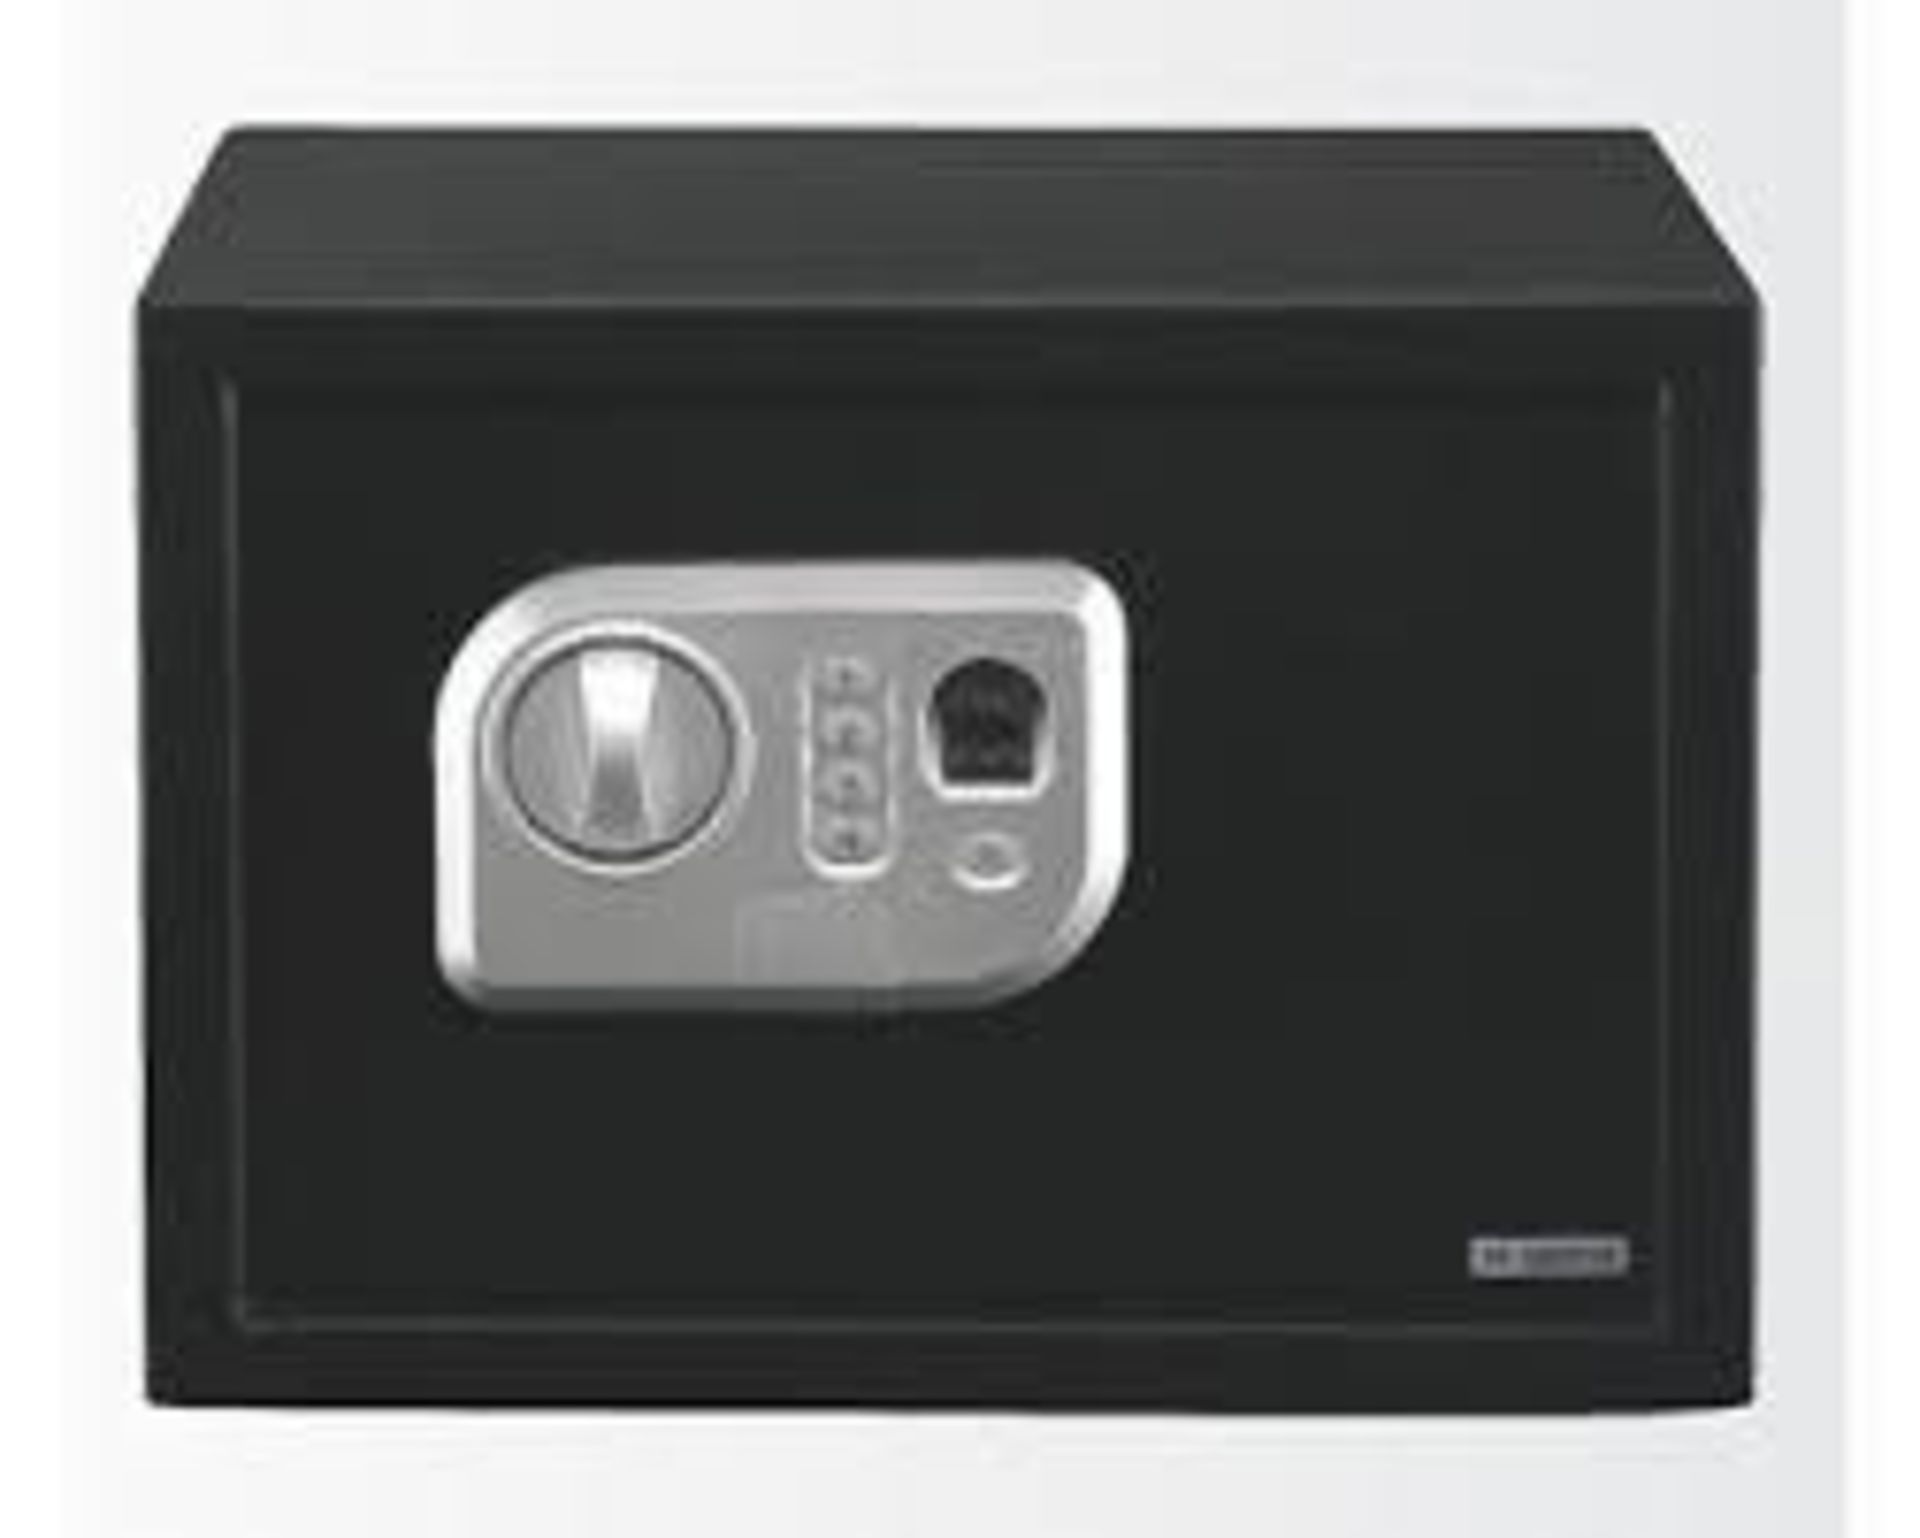 _NEW!_ Stack-On PS10B Personal Safe Security Safe Black 085529100103